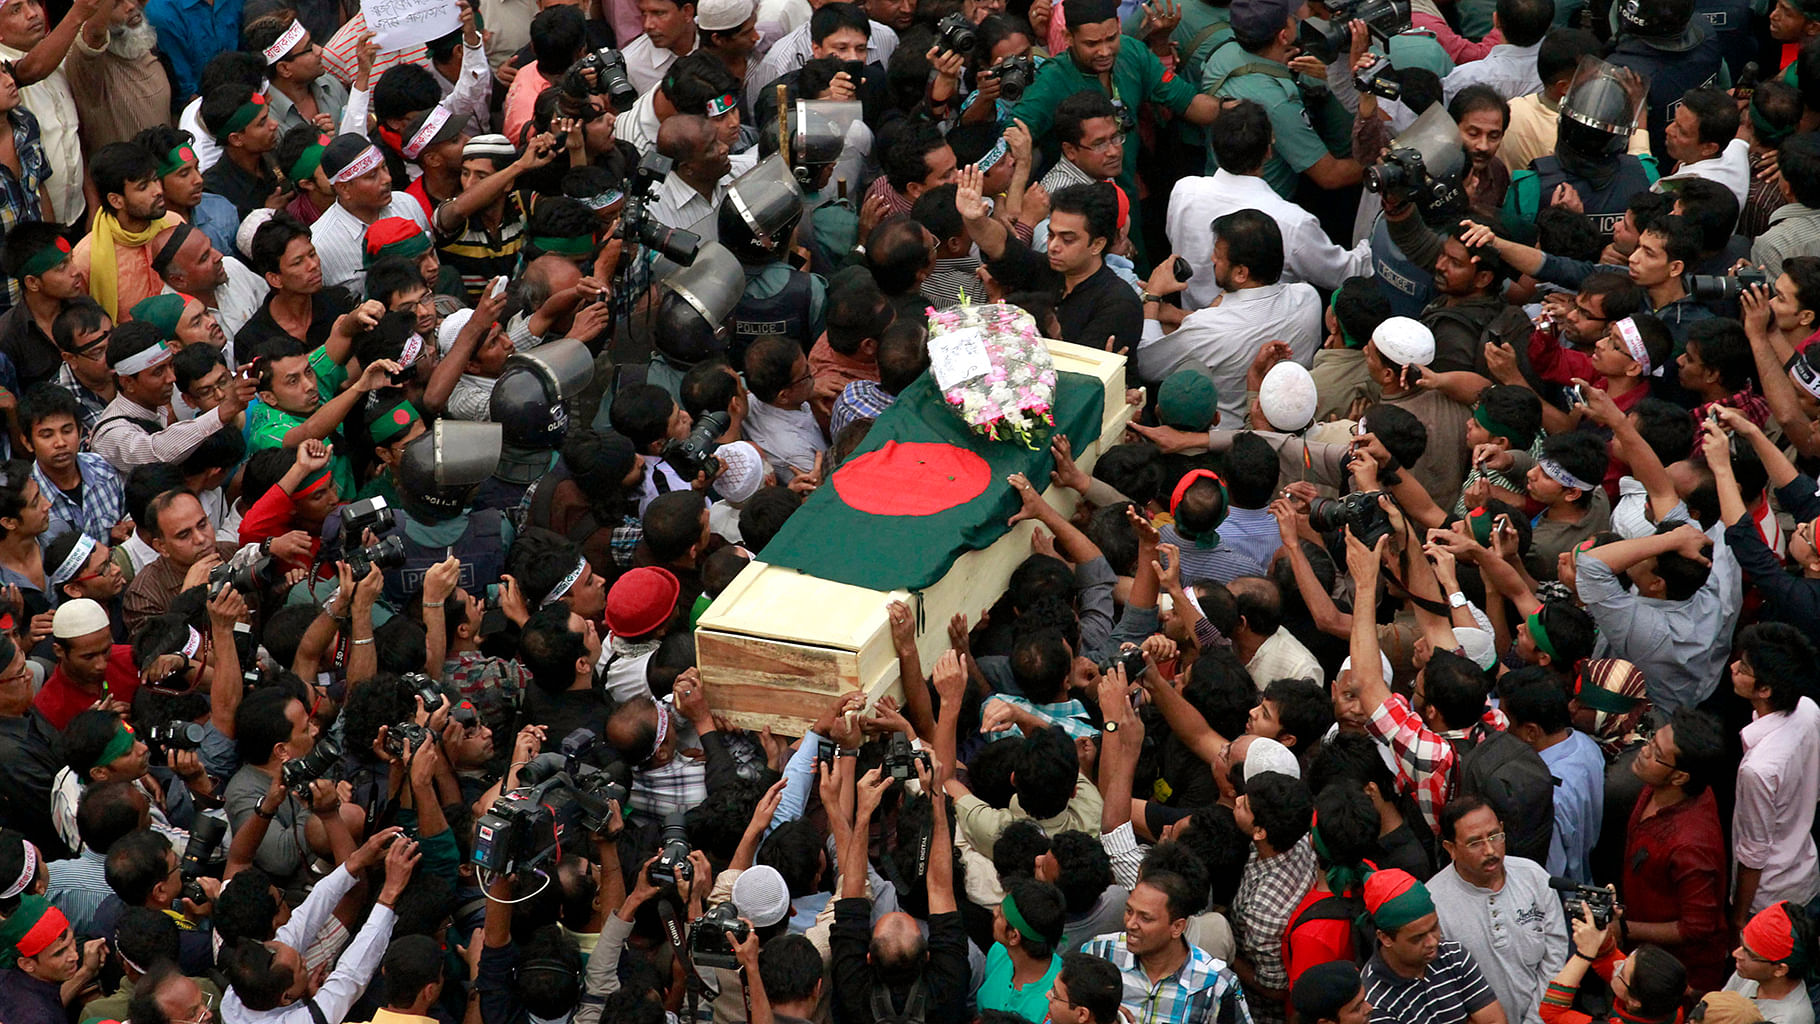 People surround the body of Rajib Haider, an
architect and blogger who was hacked to death in 2013. (Photo: Reuters)